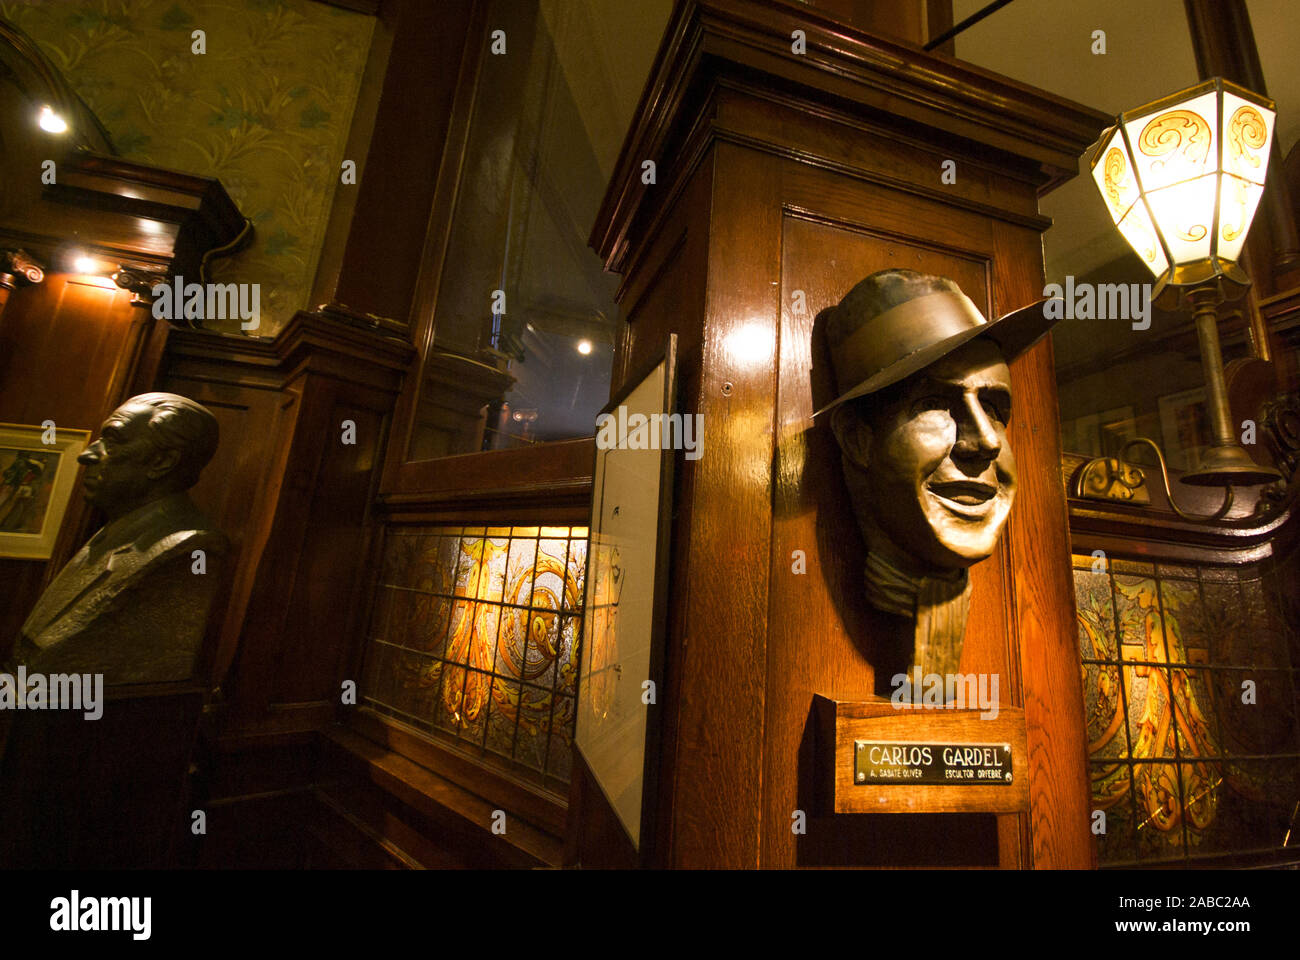 BUENOS AIRES, ARGENTINA-APRIL 7: carlos gardel tango singer statue at cafe tortoni ,cafe notables in the avenida de mayo opened in the 1858, the oldes Stock Photo